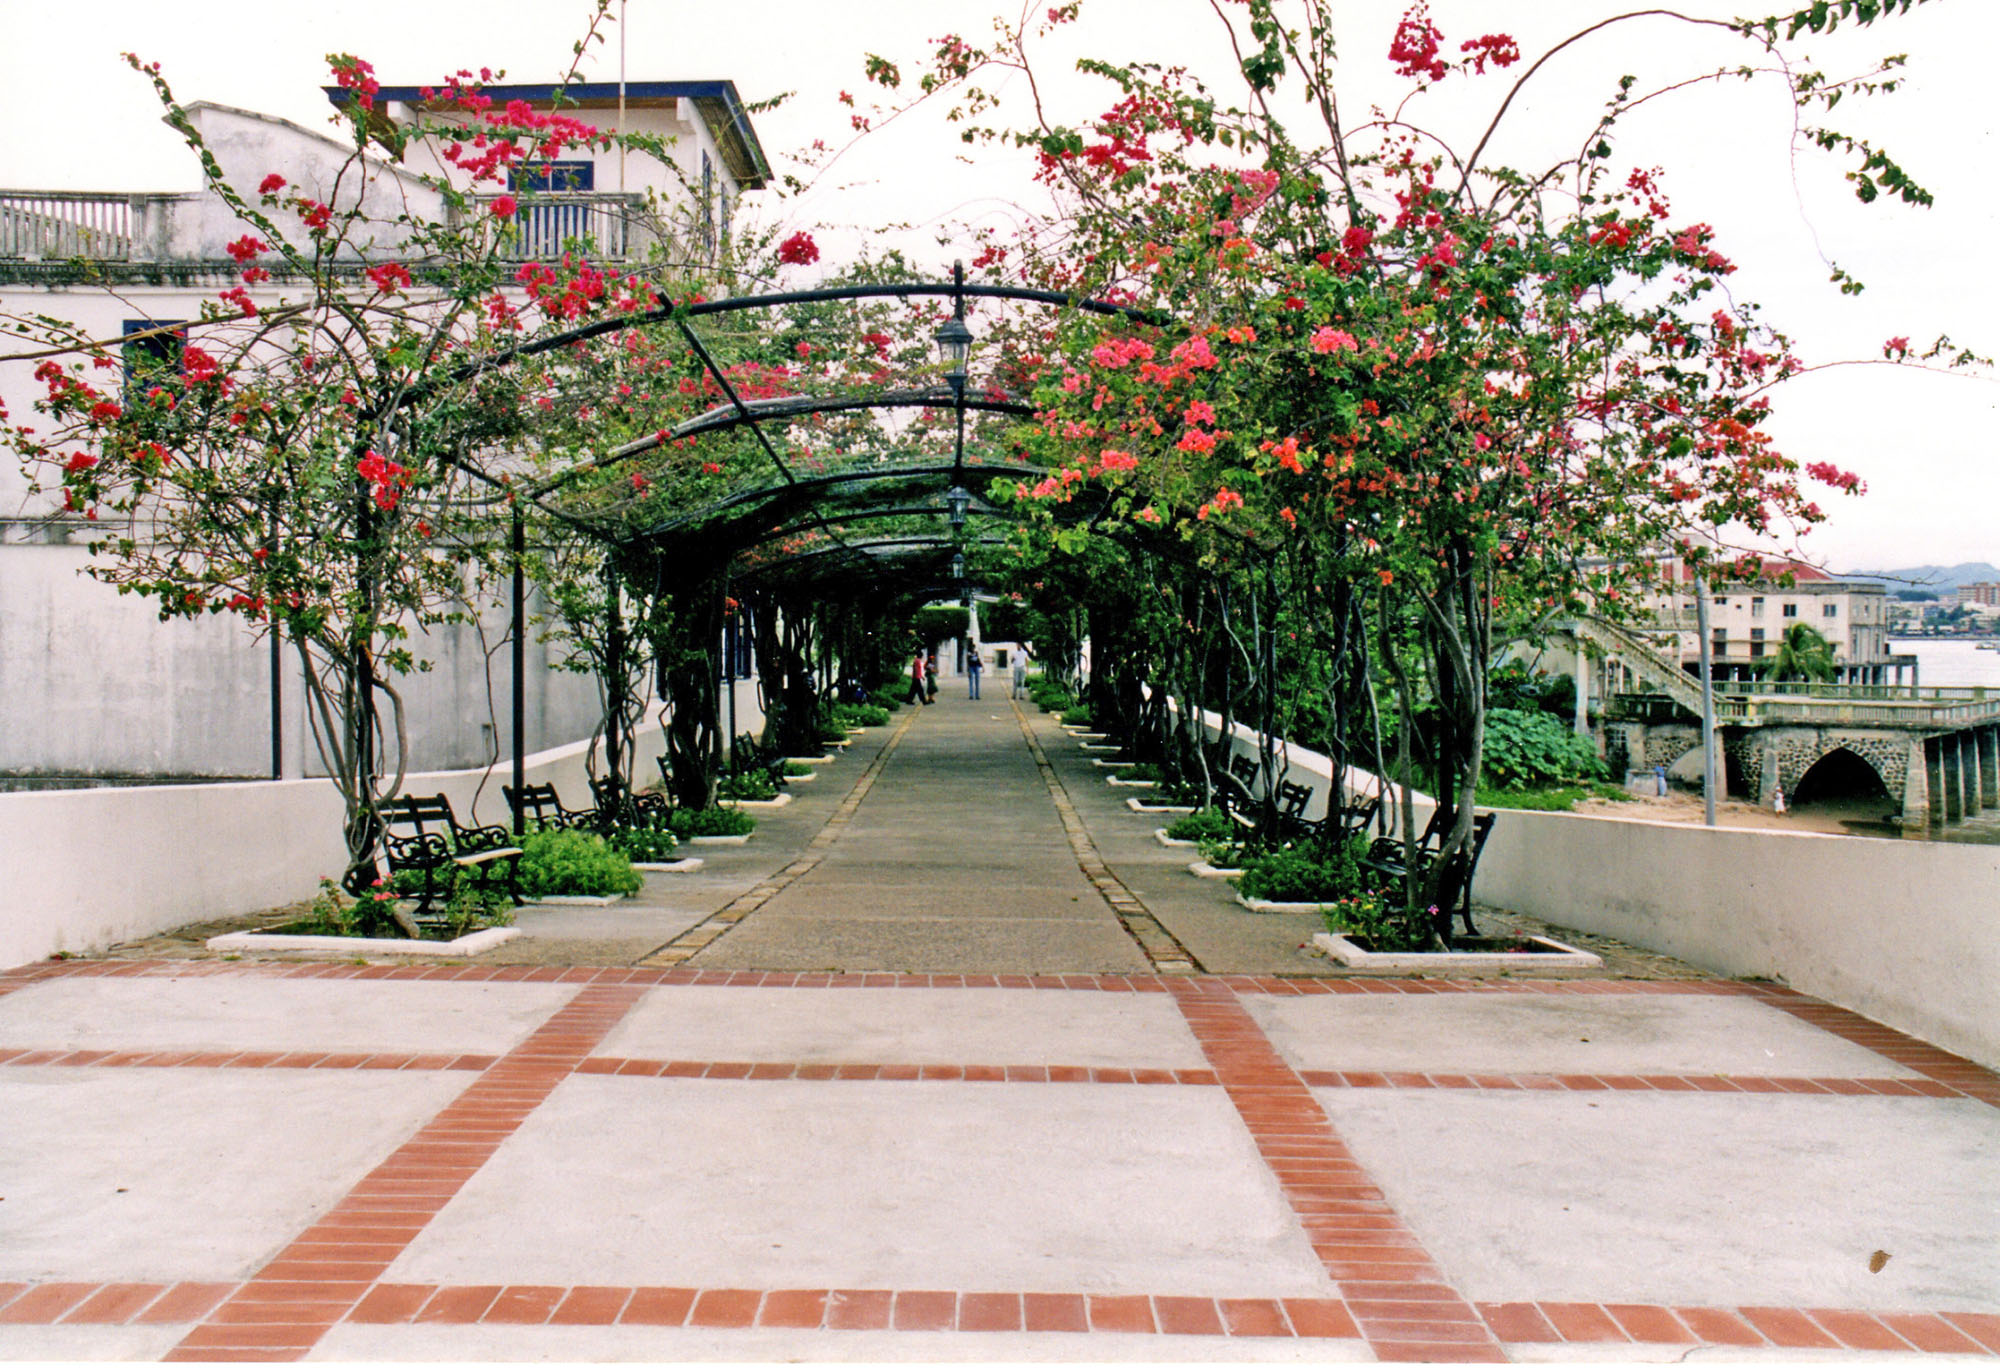 Fig. 29.14 Shade cover dramatically reduces pavement temperatures and makes walking more comfortable, as demonstrated by this walkway in Panama City, Panama.